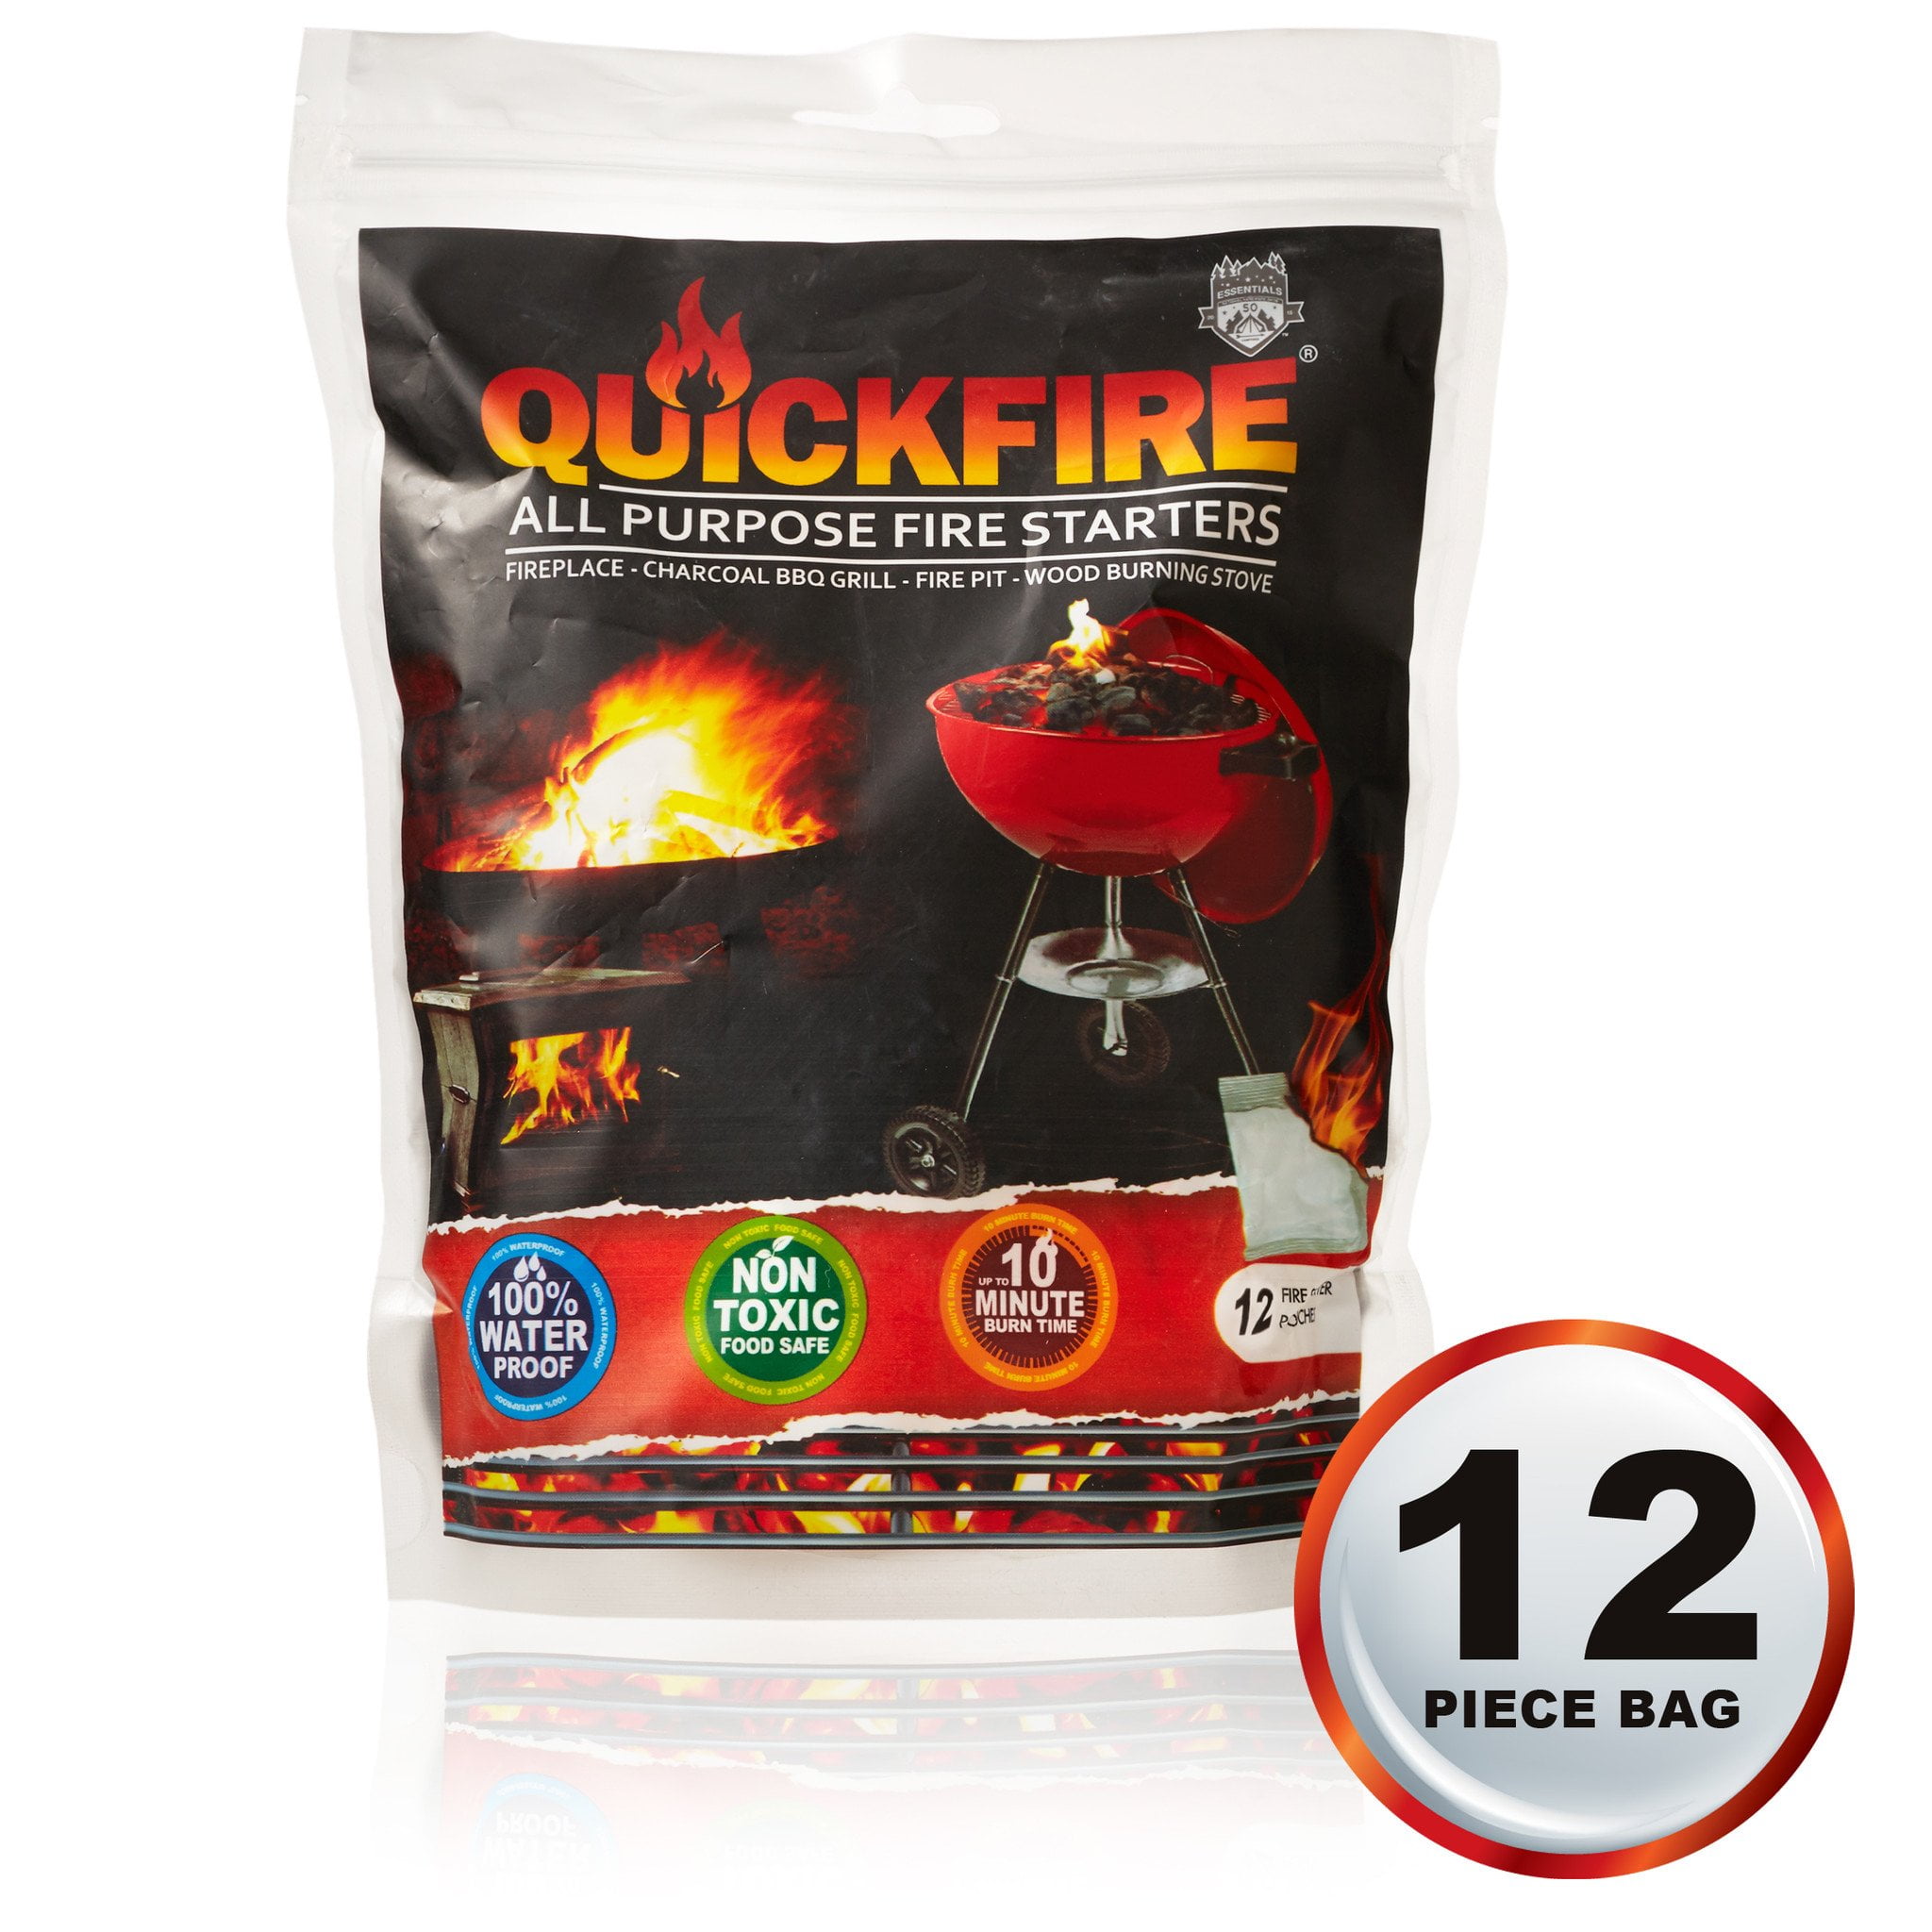 Fire Starter 100 pcs Quick Instant Fire Starters,Waterproof All-Purpose Odorless and Non-Toxic Charcoal Starters BBQ Kindling Accessories for Campfire,Grills,Charcoal,Fireplace,Firepits,Survival. 